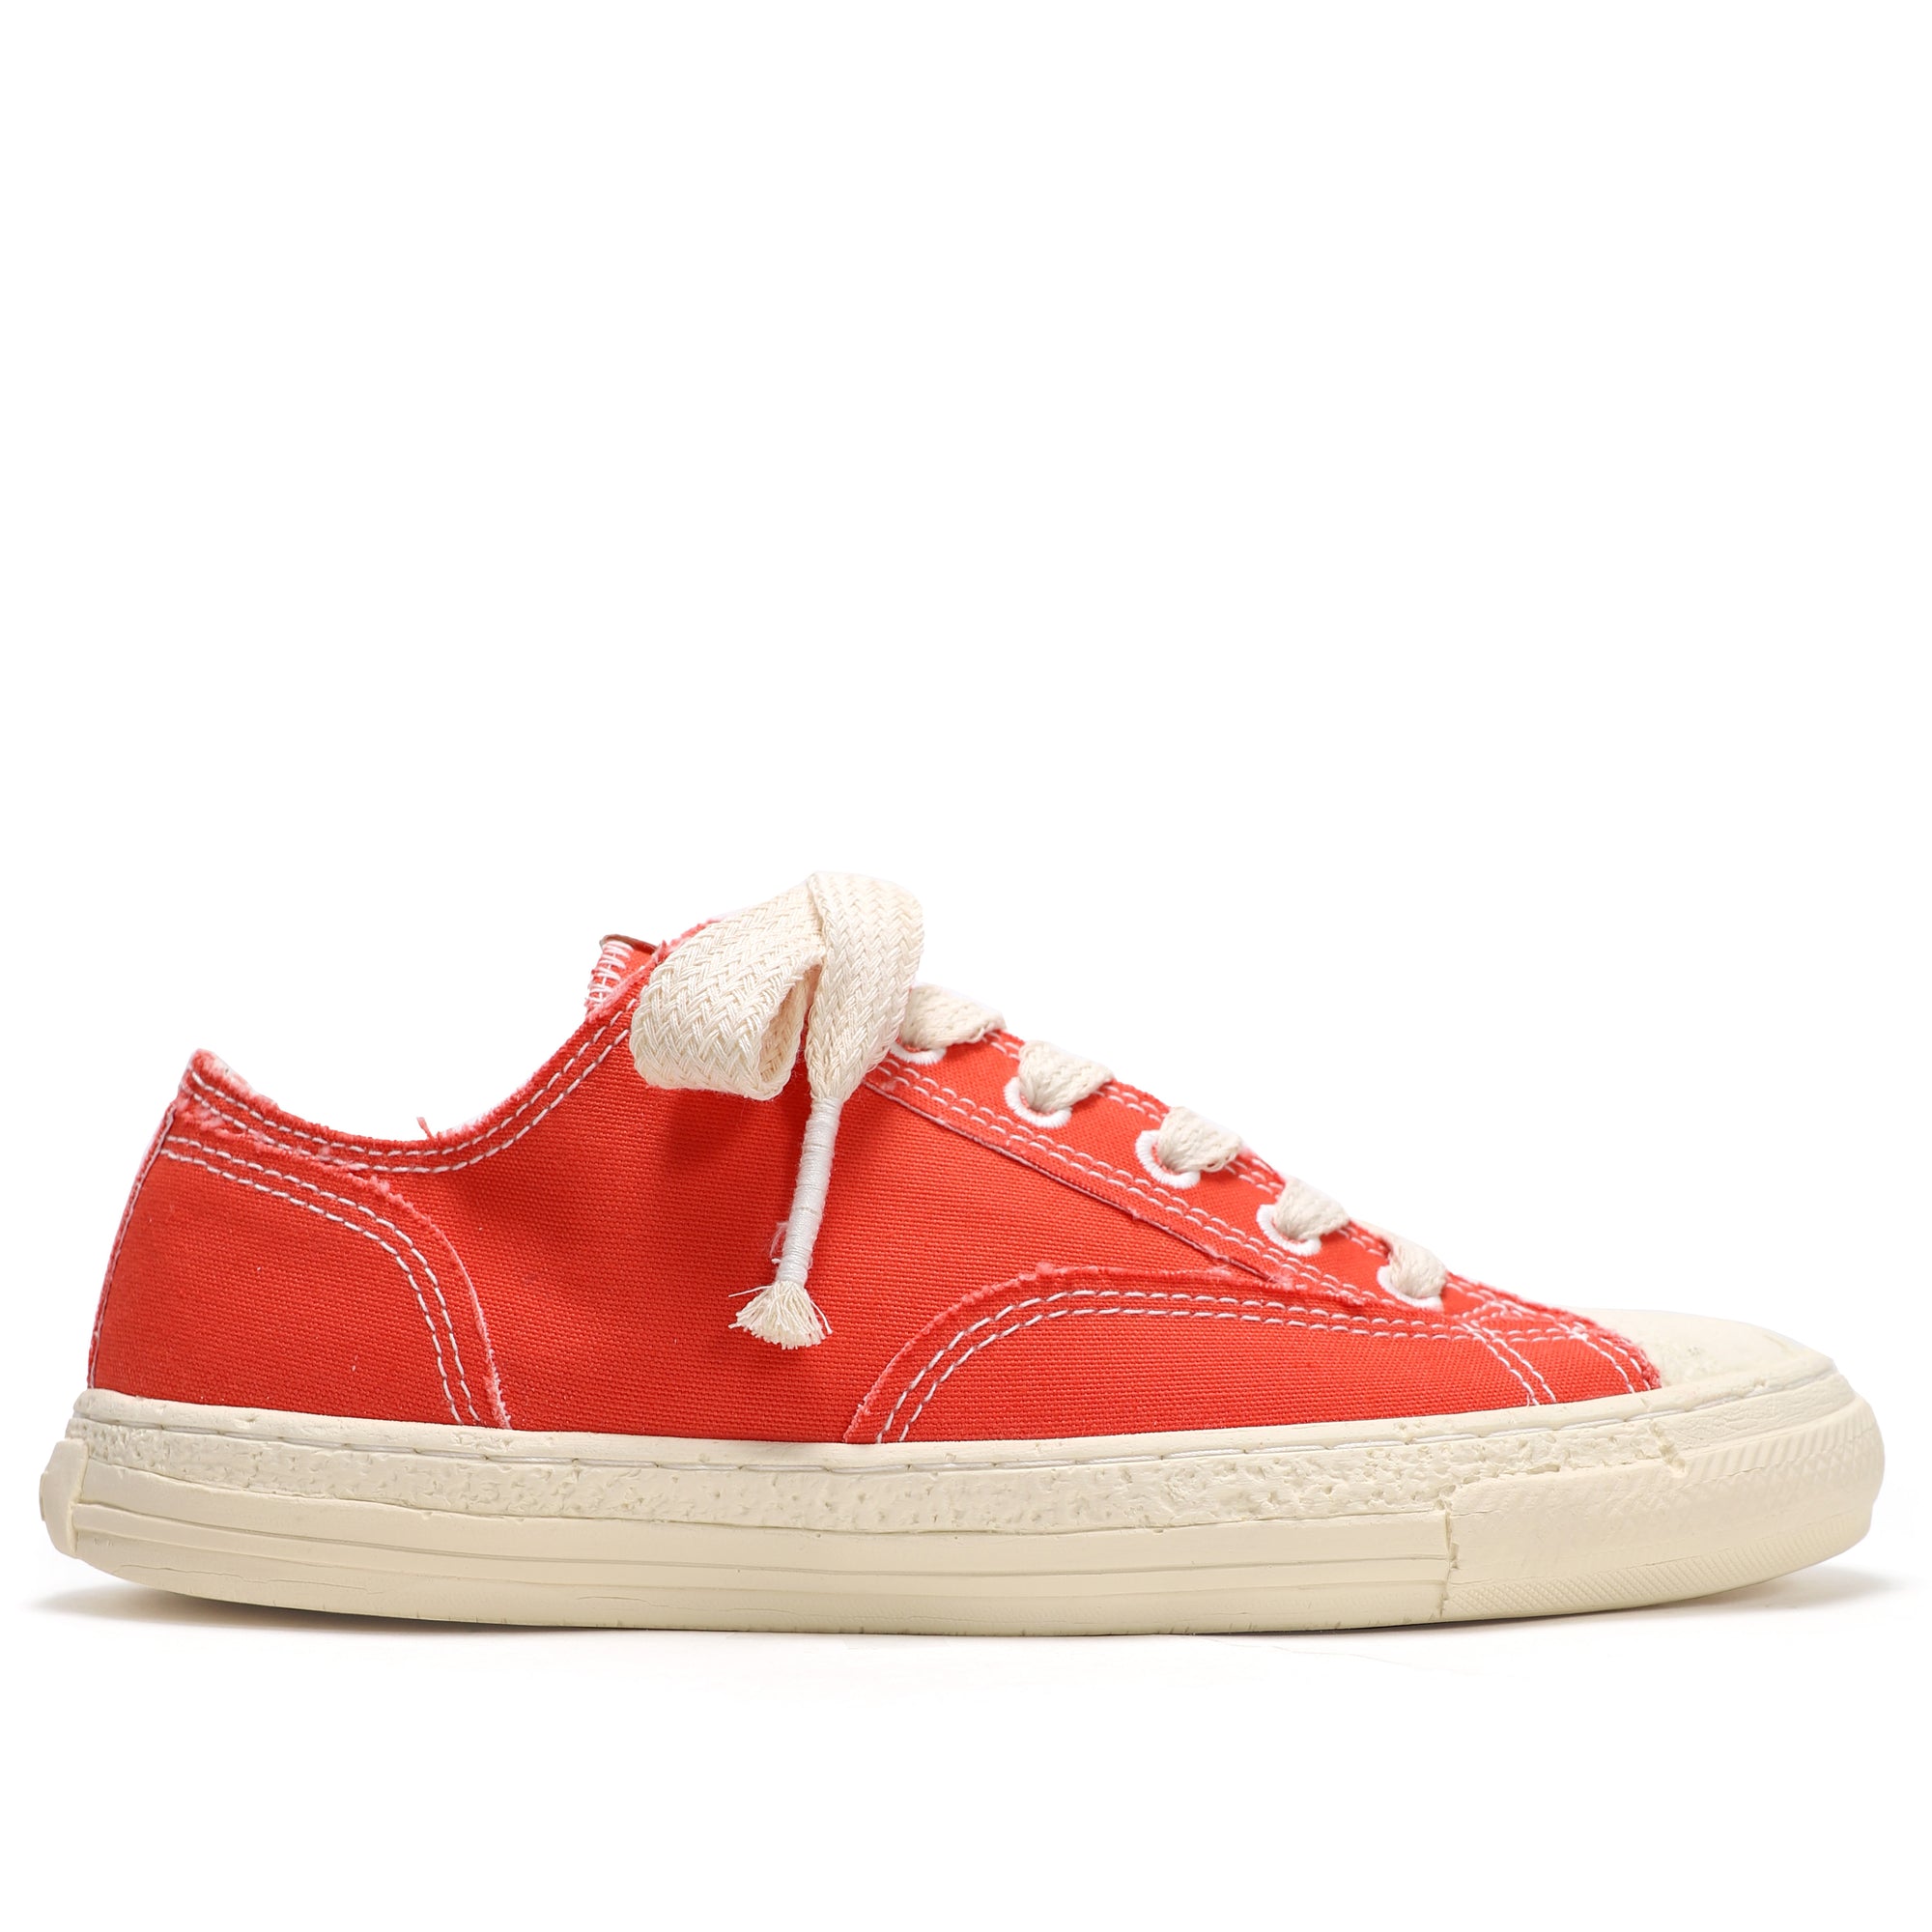 MAISON MIHARA YASUHIRO - SNEAKER GENERAL SCALE - A06FW502(RED) view 1